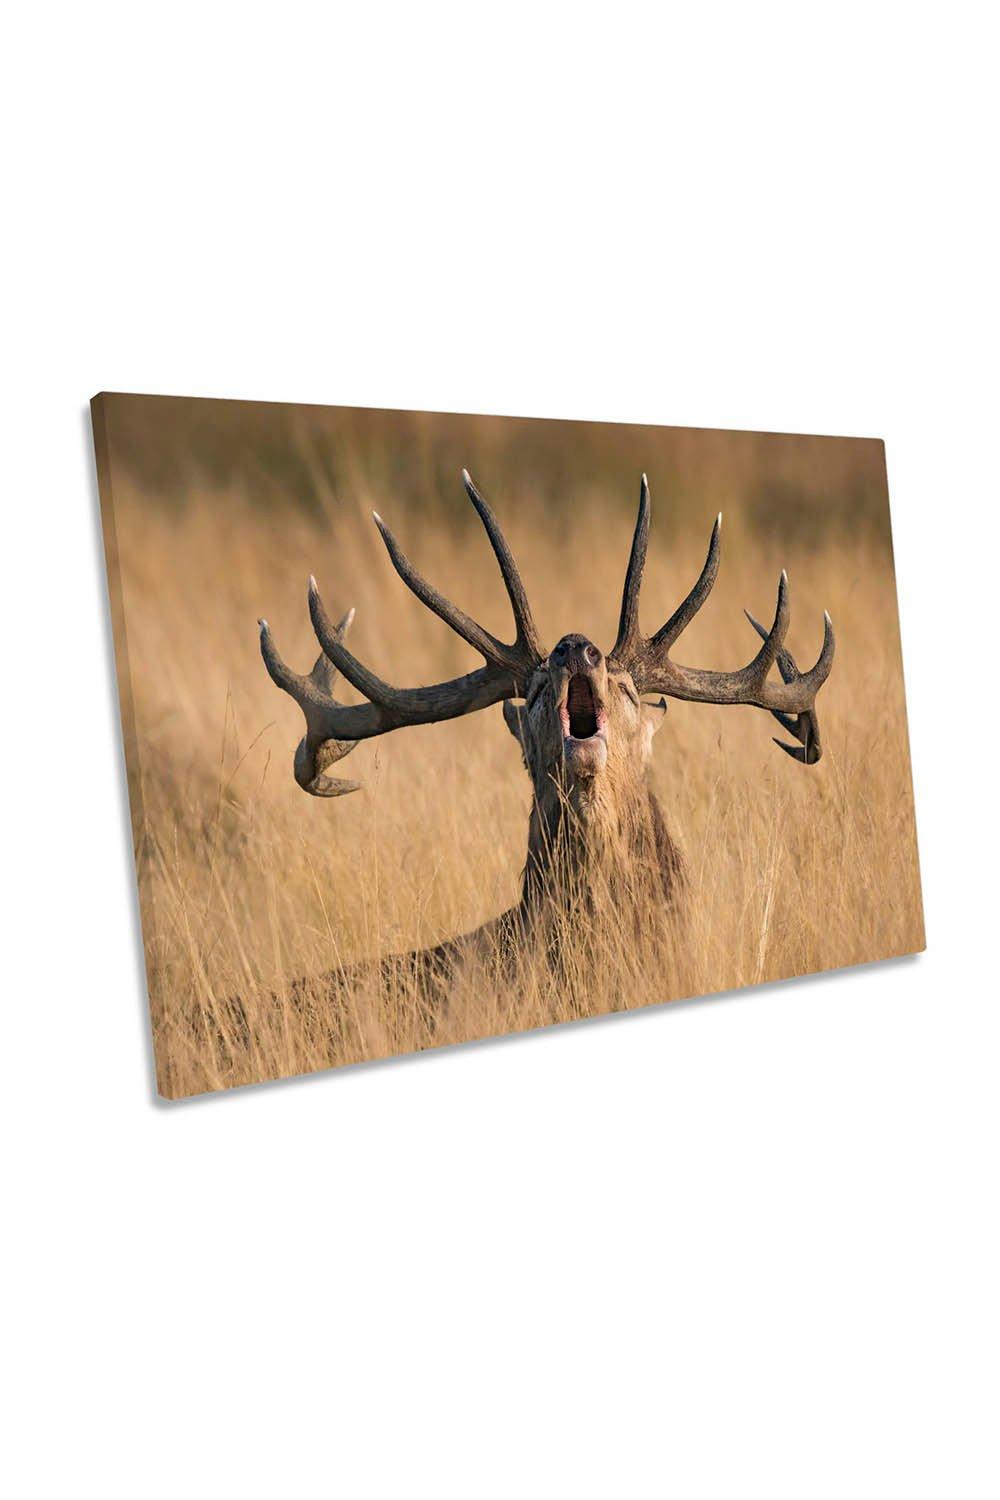 Stag Cry Antlers Deer Wildlife Canvas Wall Art Picture Print